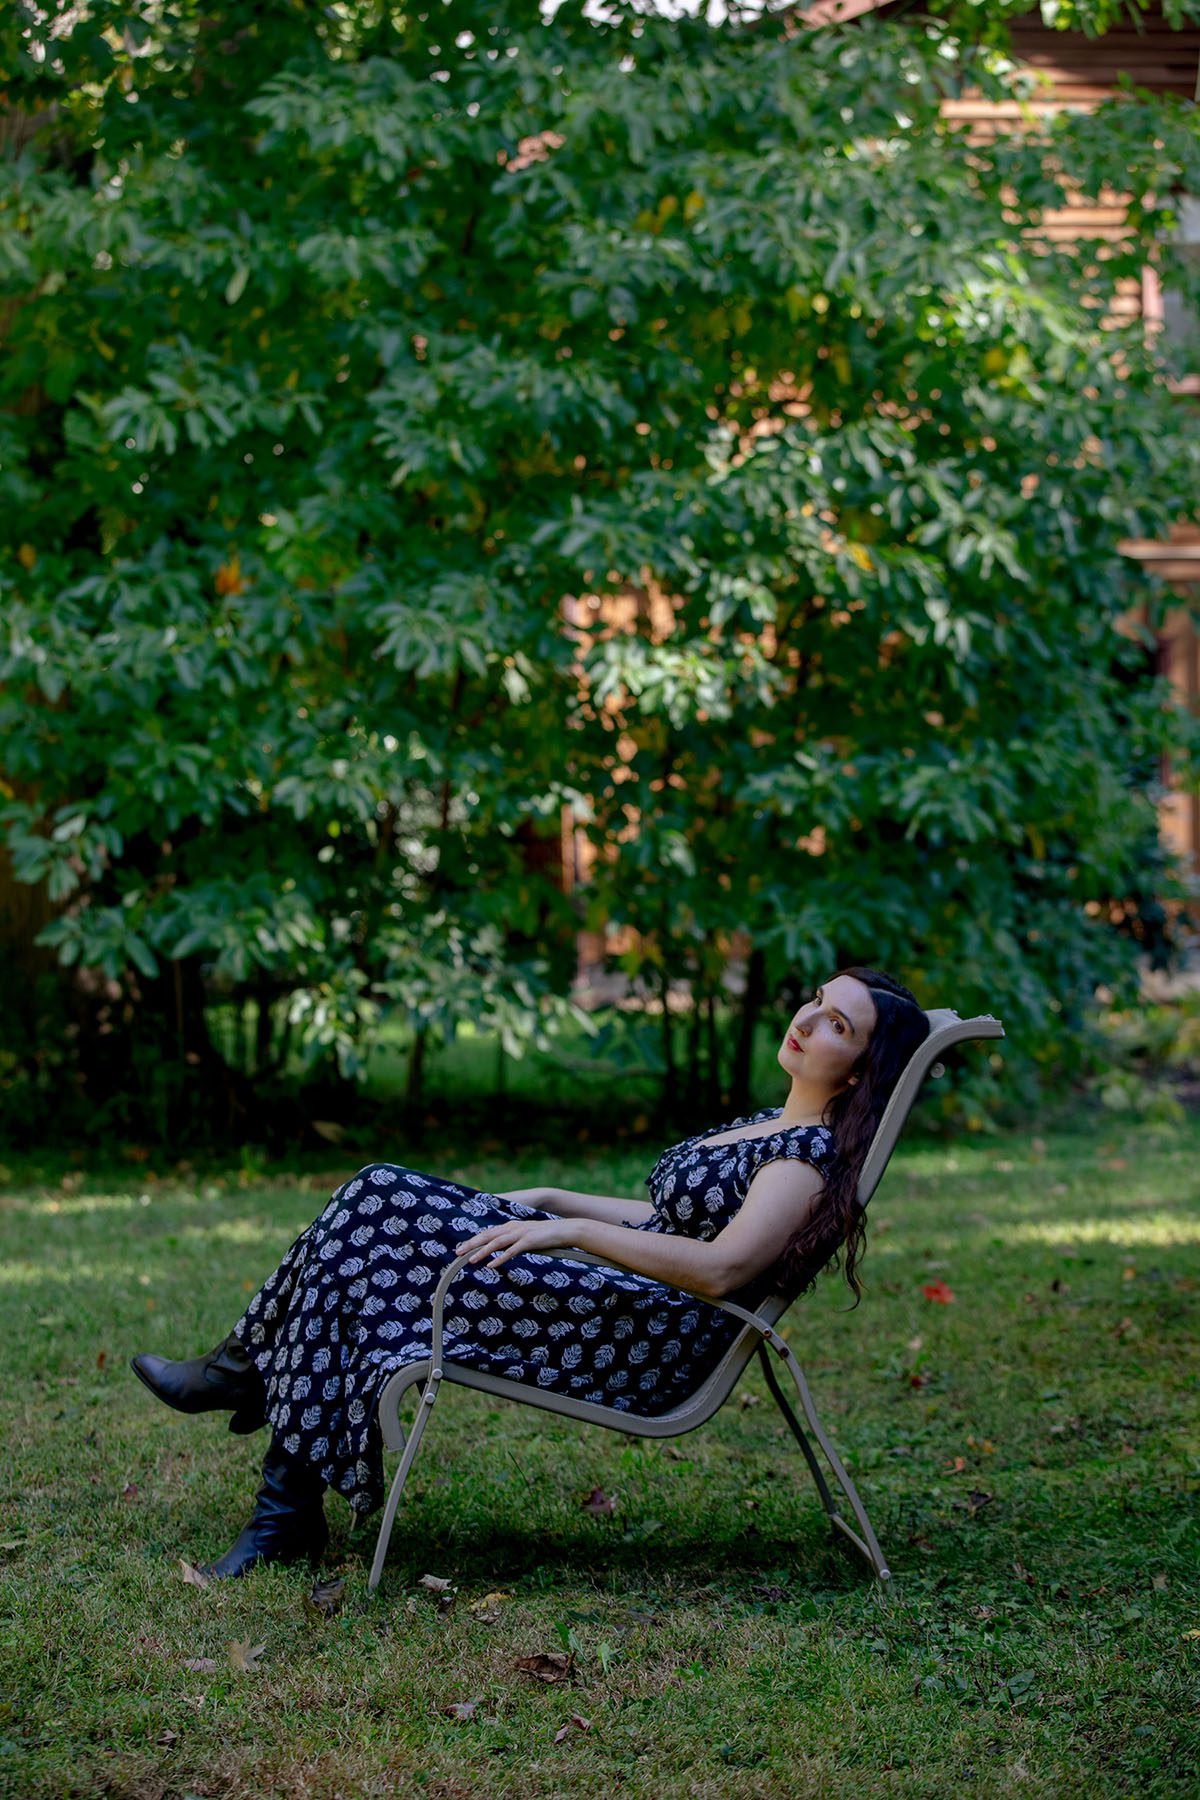 Sarah Anne Mass looks on while sitting in a chair in a garden.